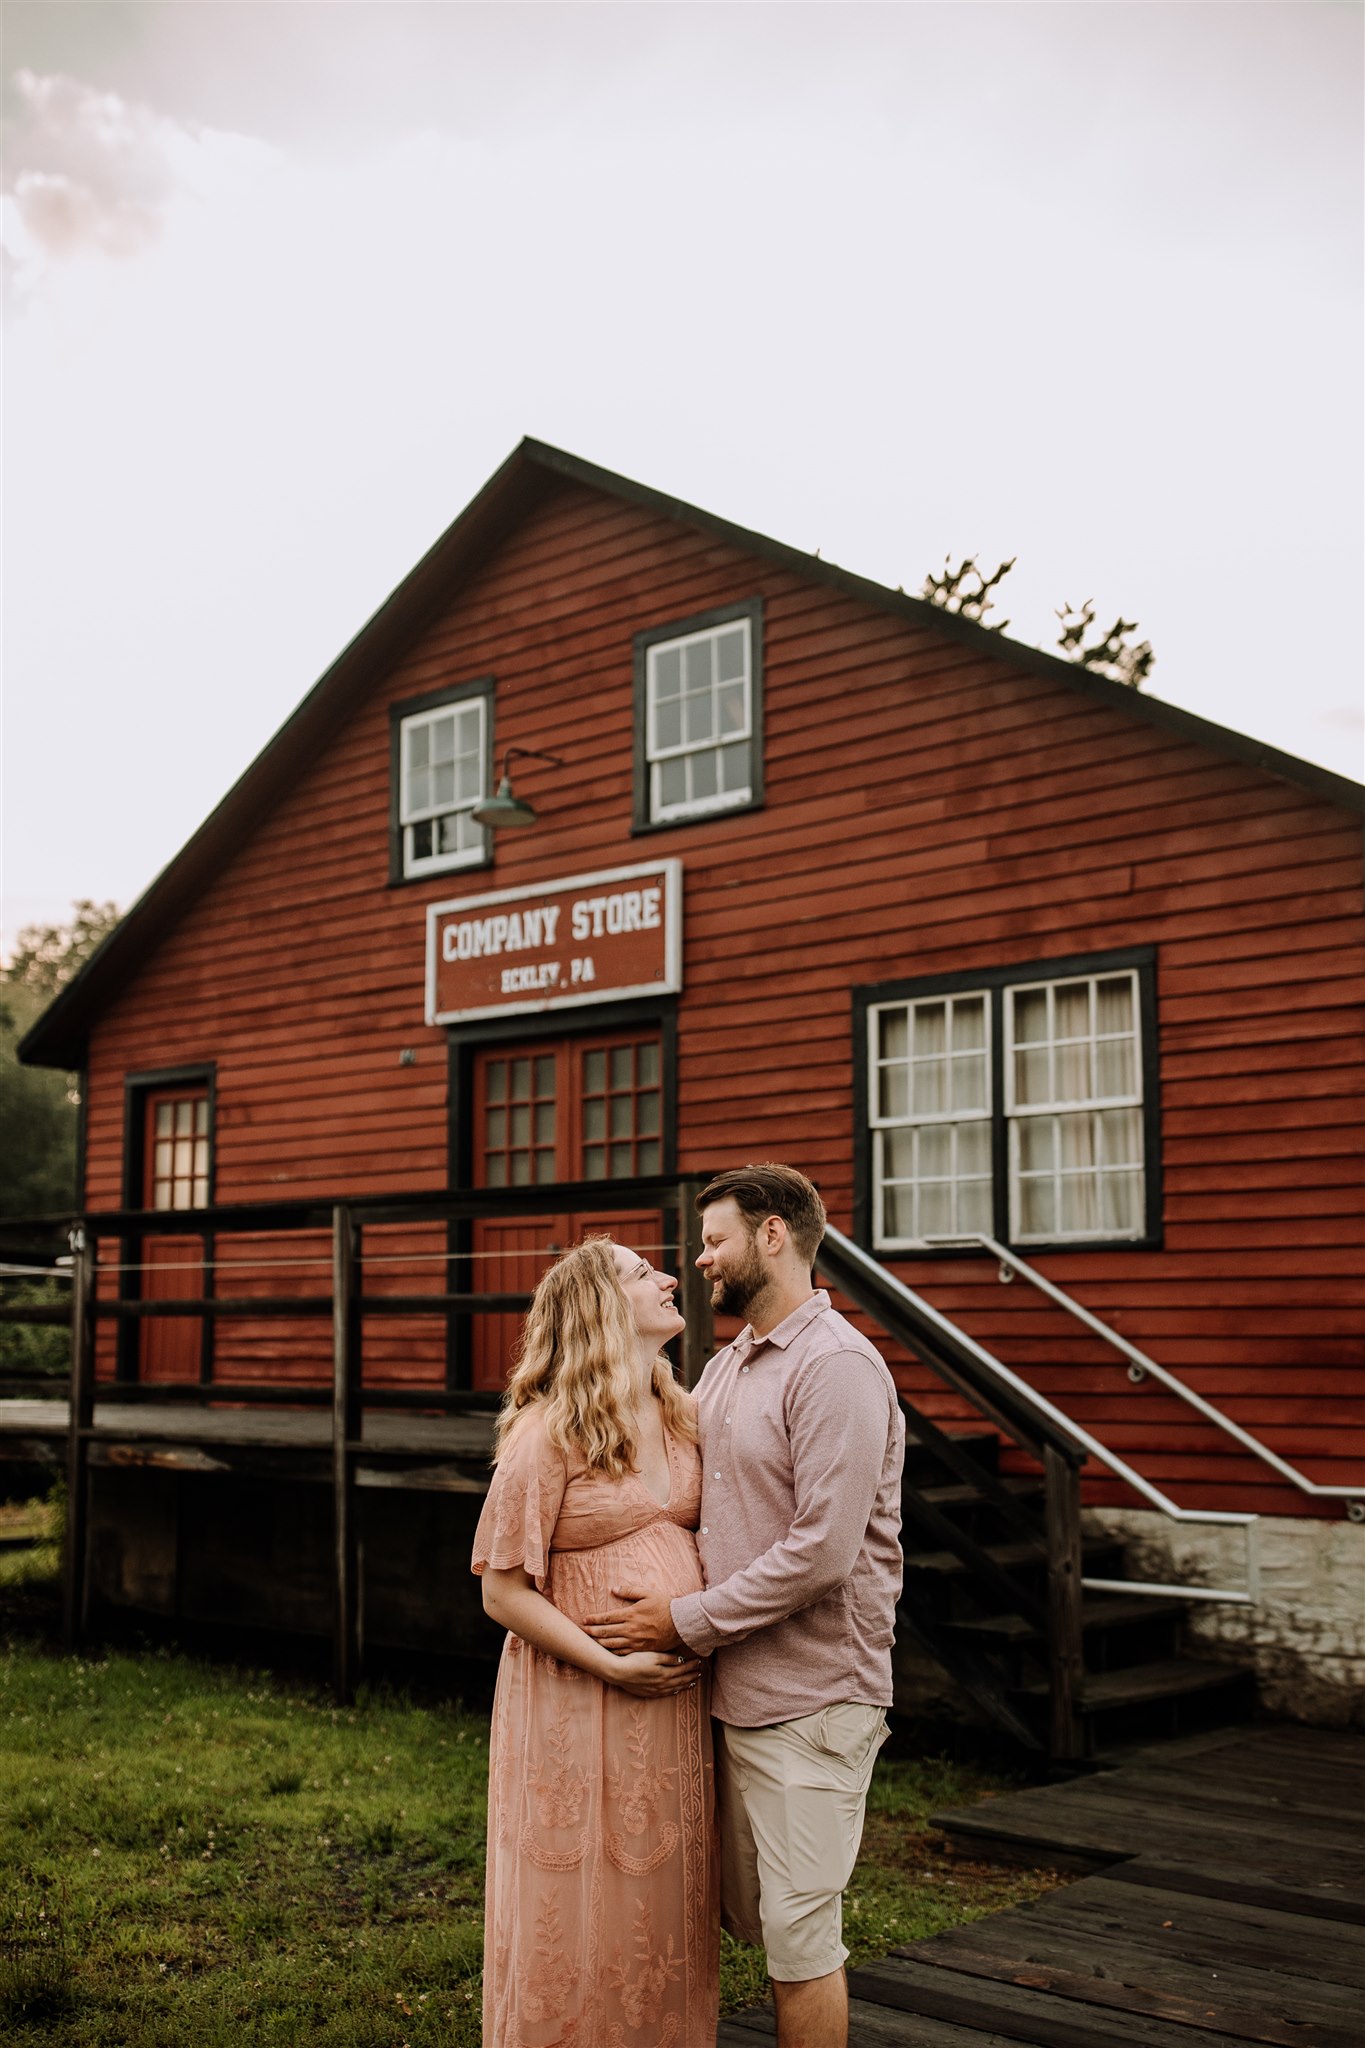 Couple in front of General Store at Eckley Miners Village in Pennsylvania